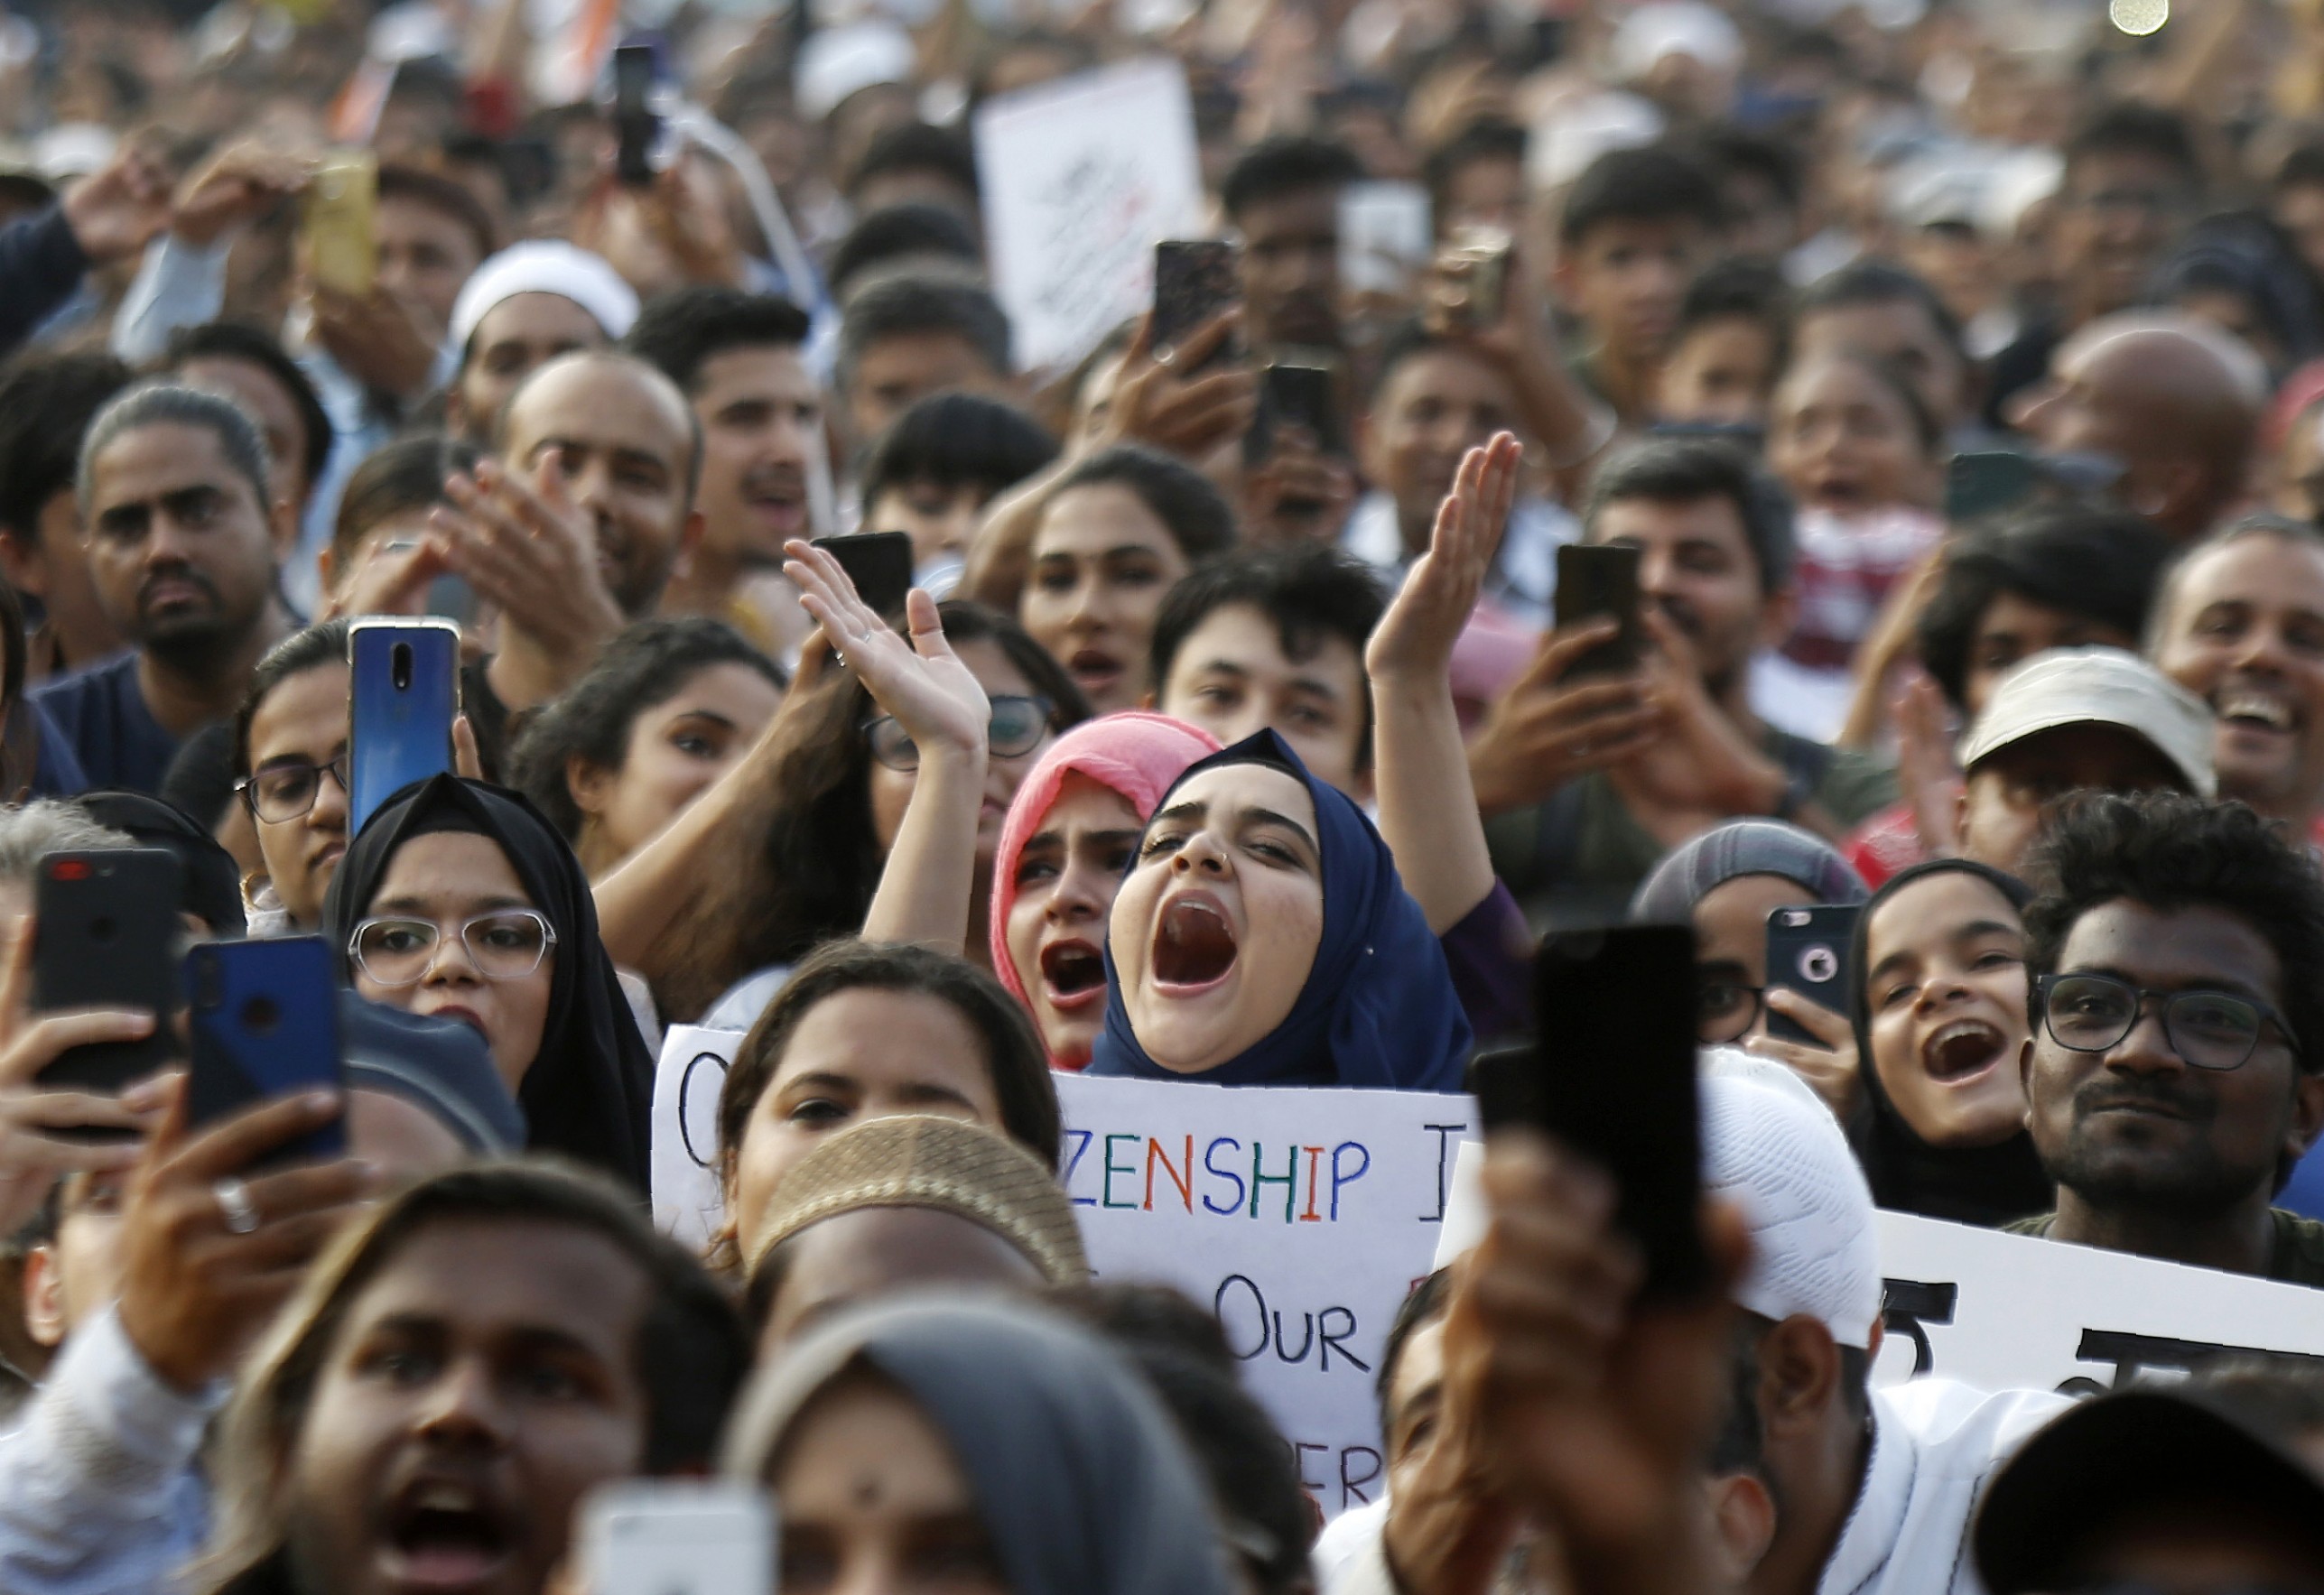 A protest against the Citizenship Amendment Act in Mumbai, India, in December 2019. Photo: AP